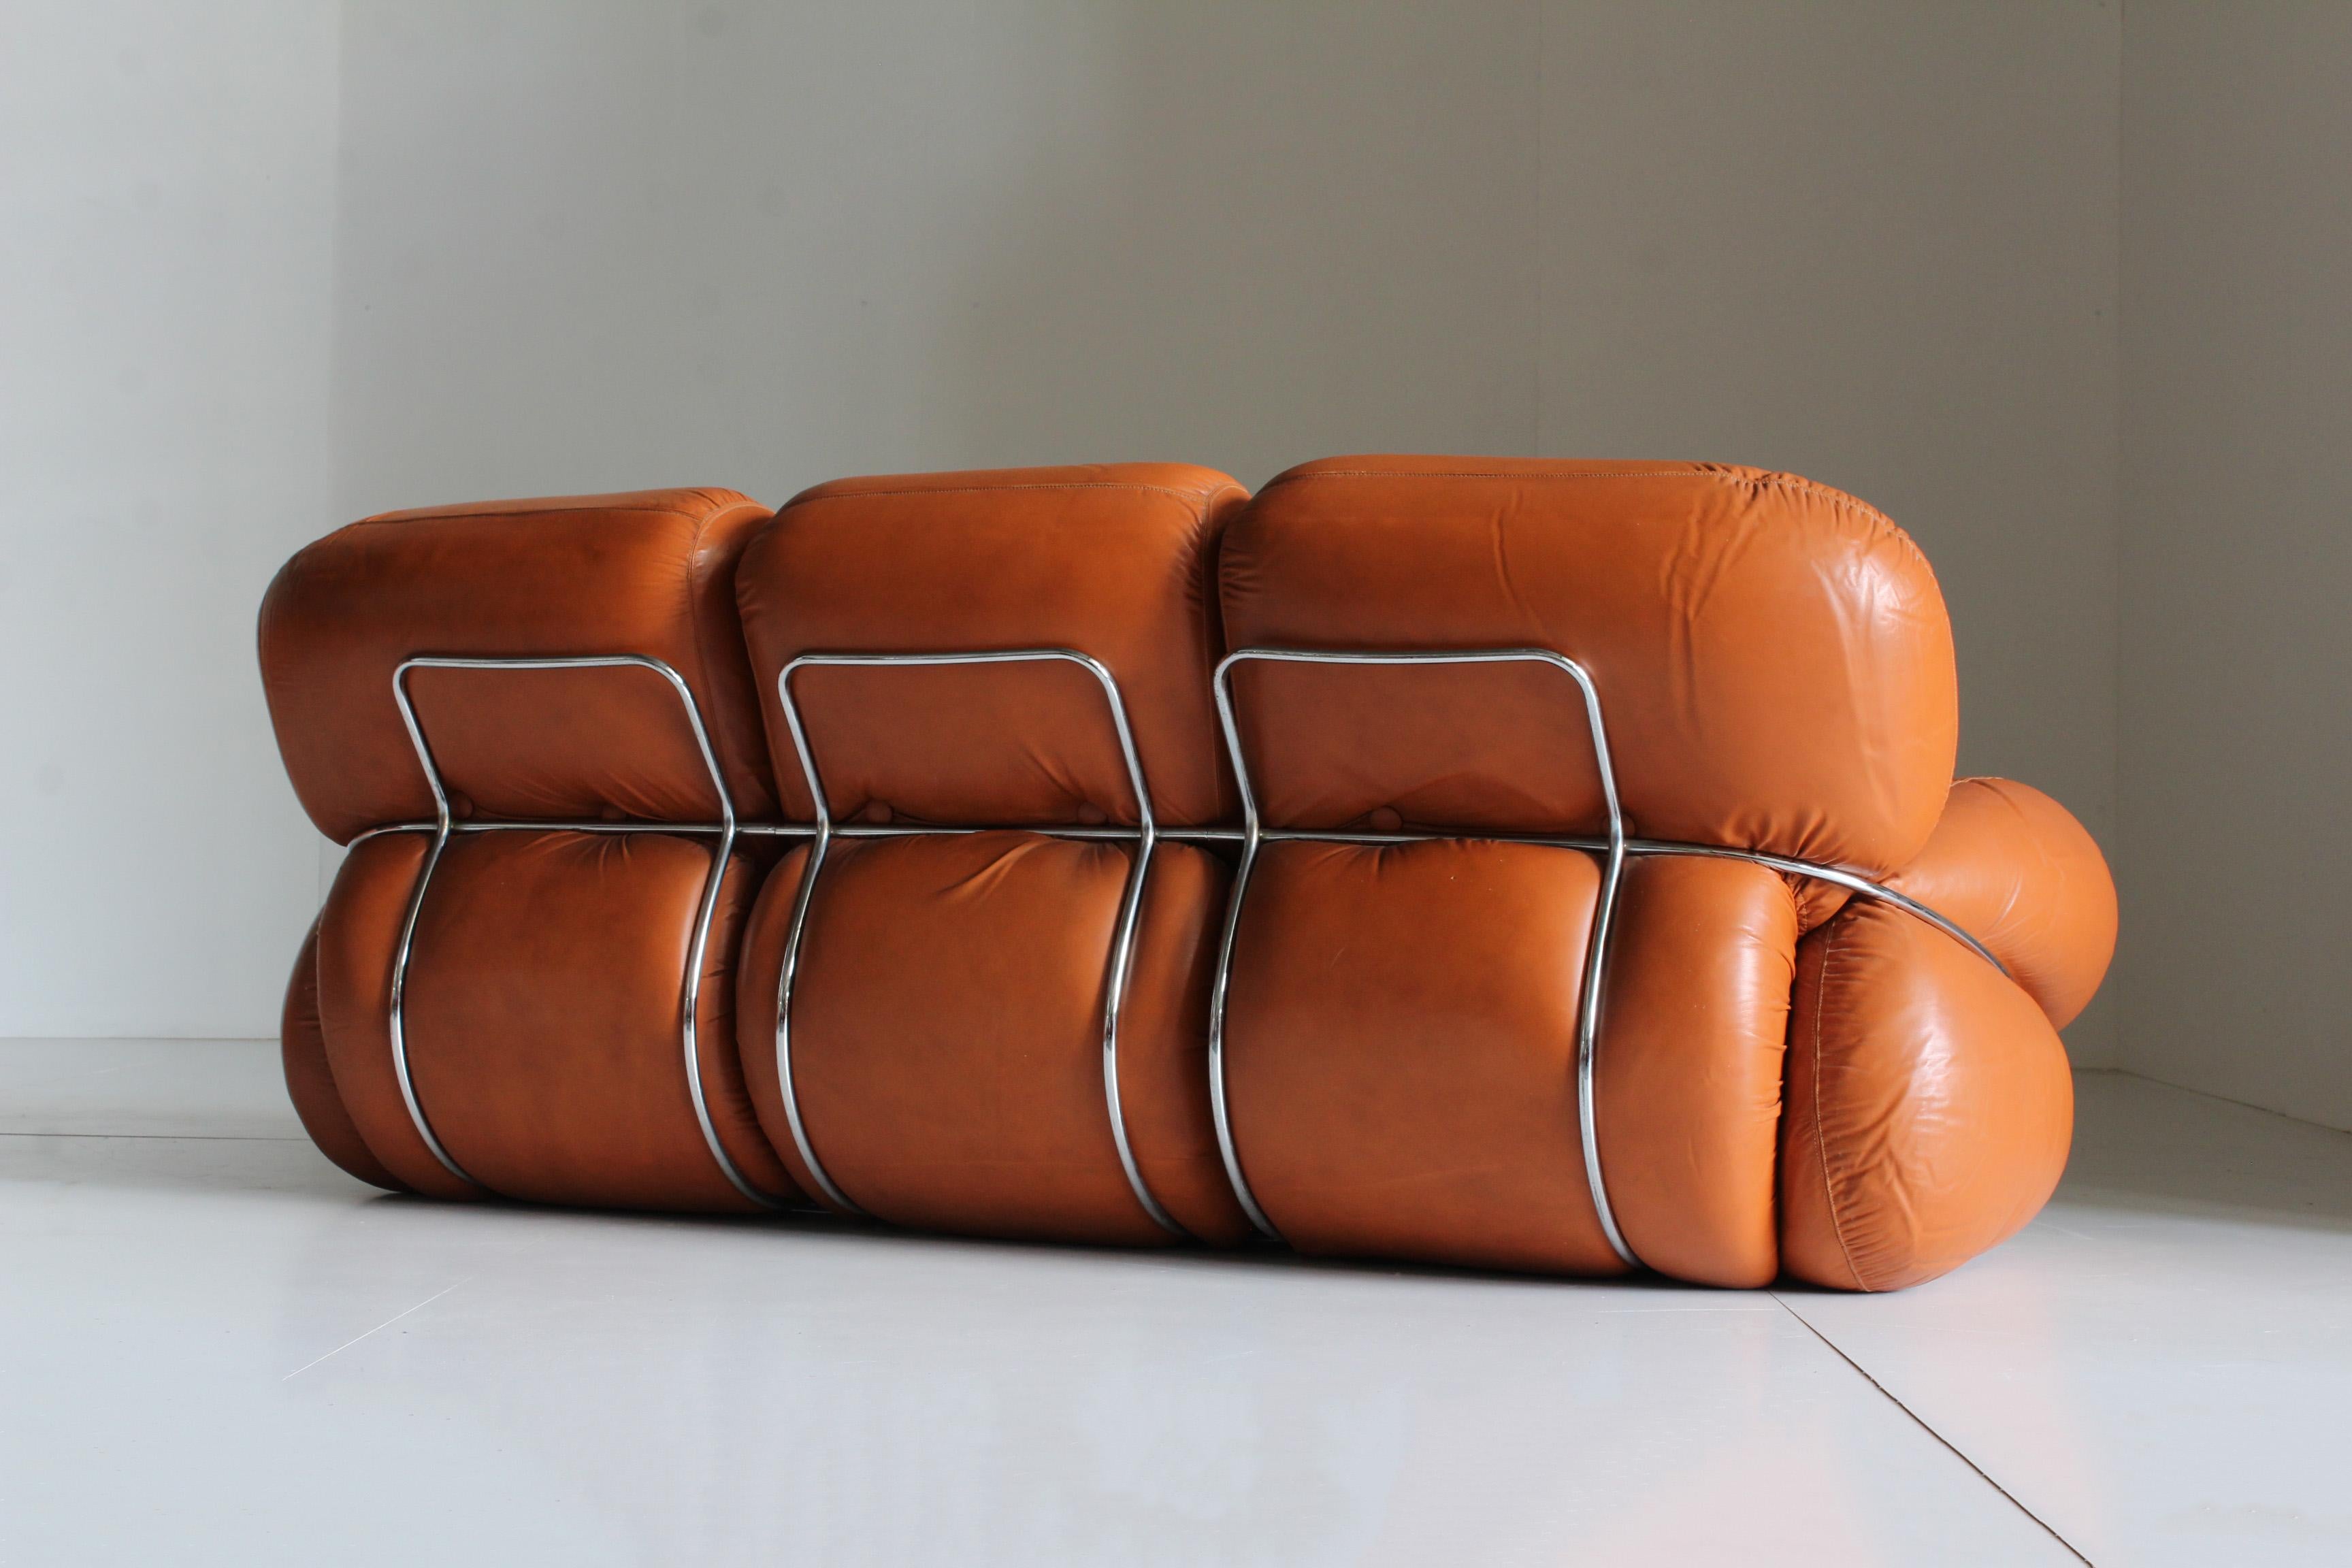 Adriano Piazzesi Okay sofa 1970s Italy - Okay sofa designed by Italian designer Adriano Piazzesi in the 1970s. This chunky and highly comfortable 3 seater sofa is in a good condition with minor traces of use, see pictures. This edition is in cognac